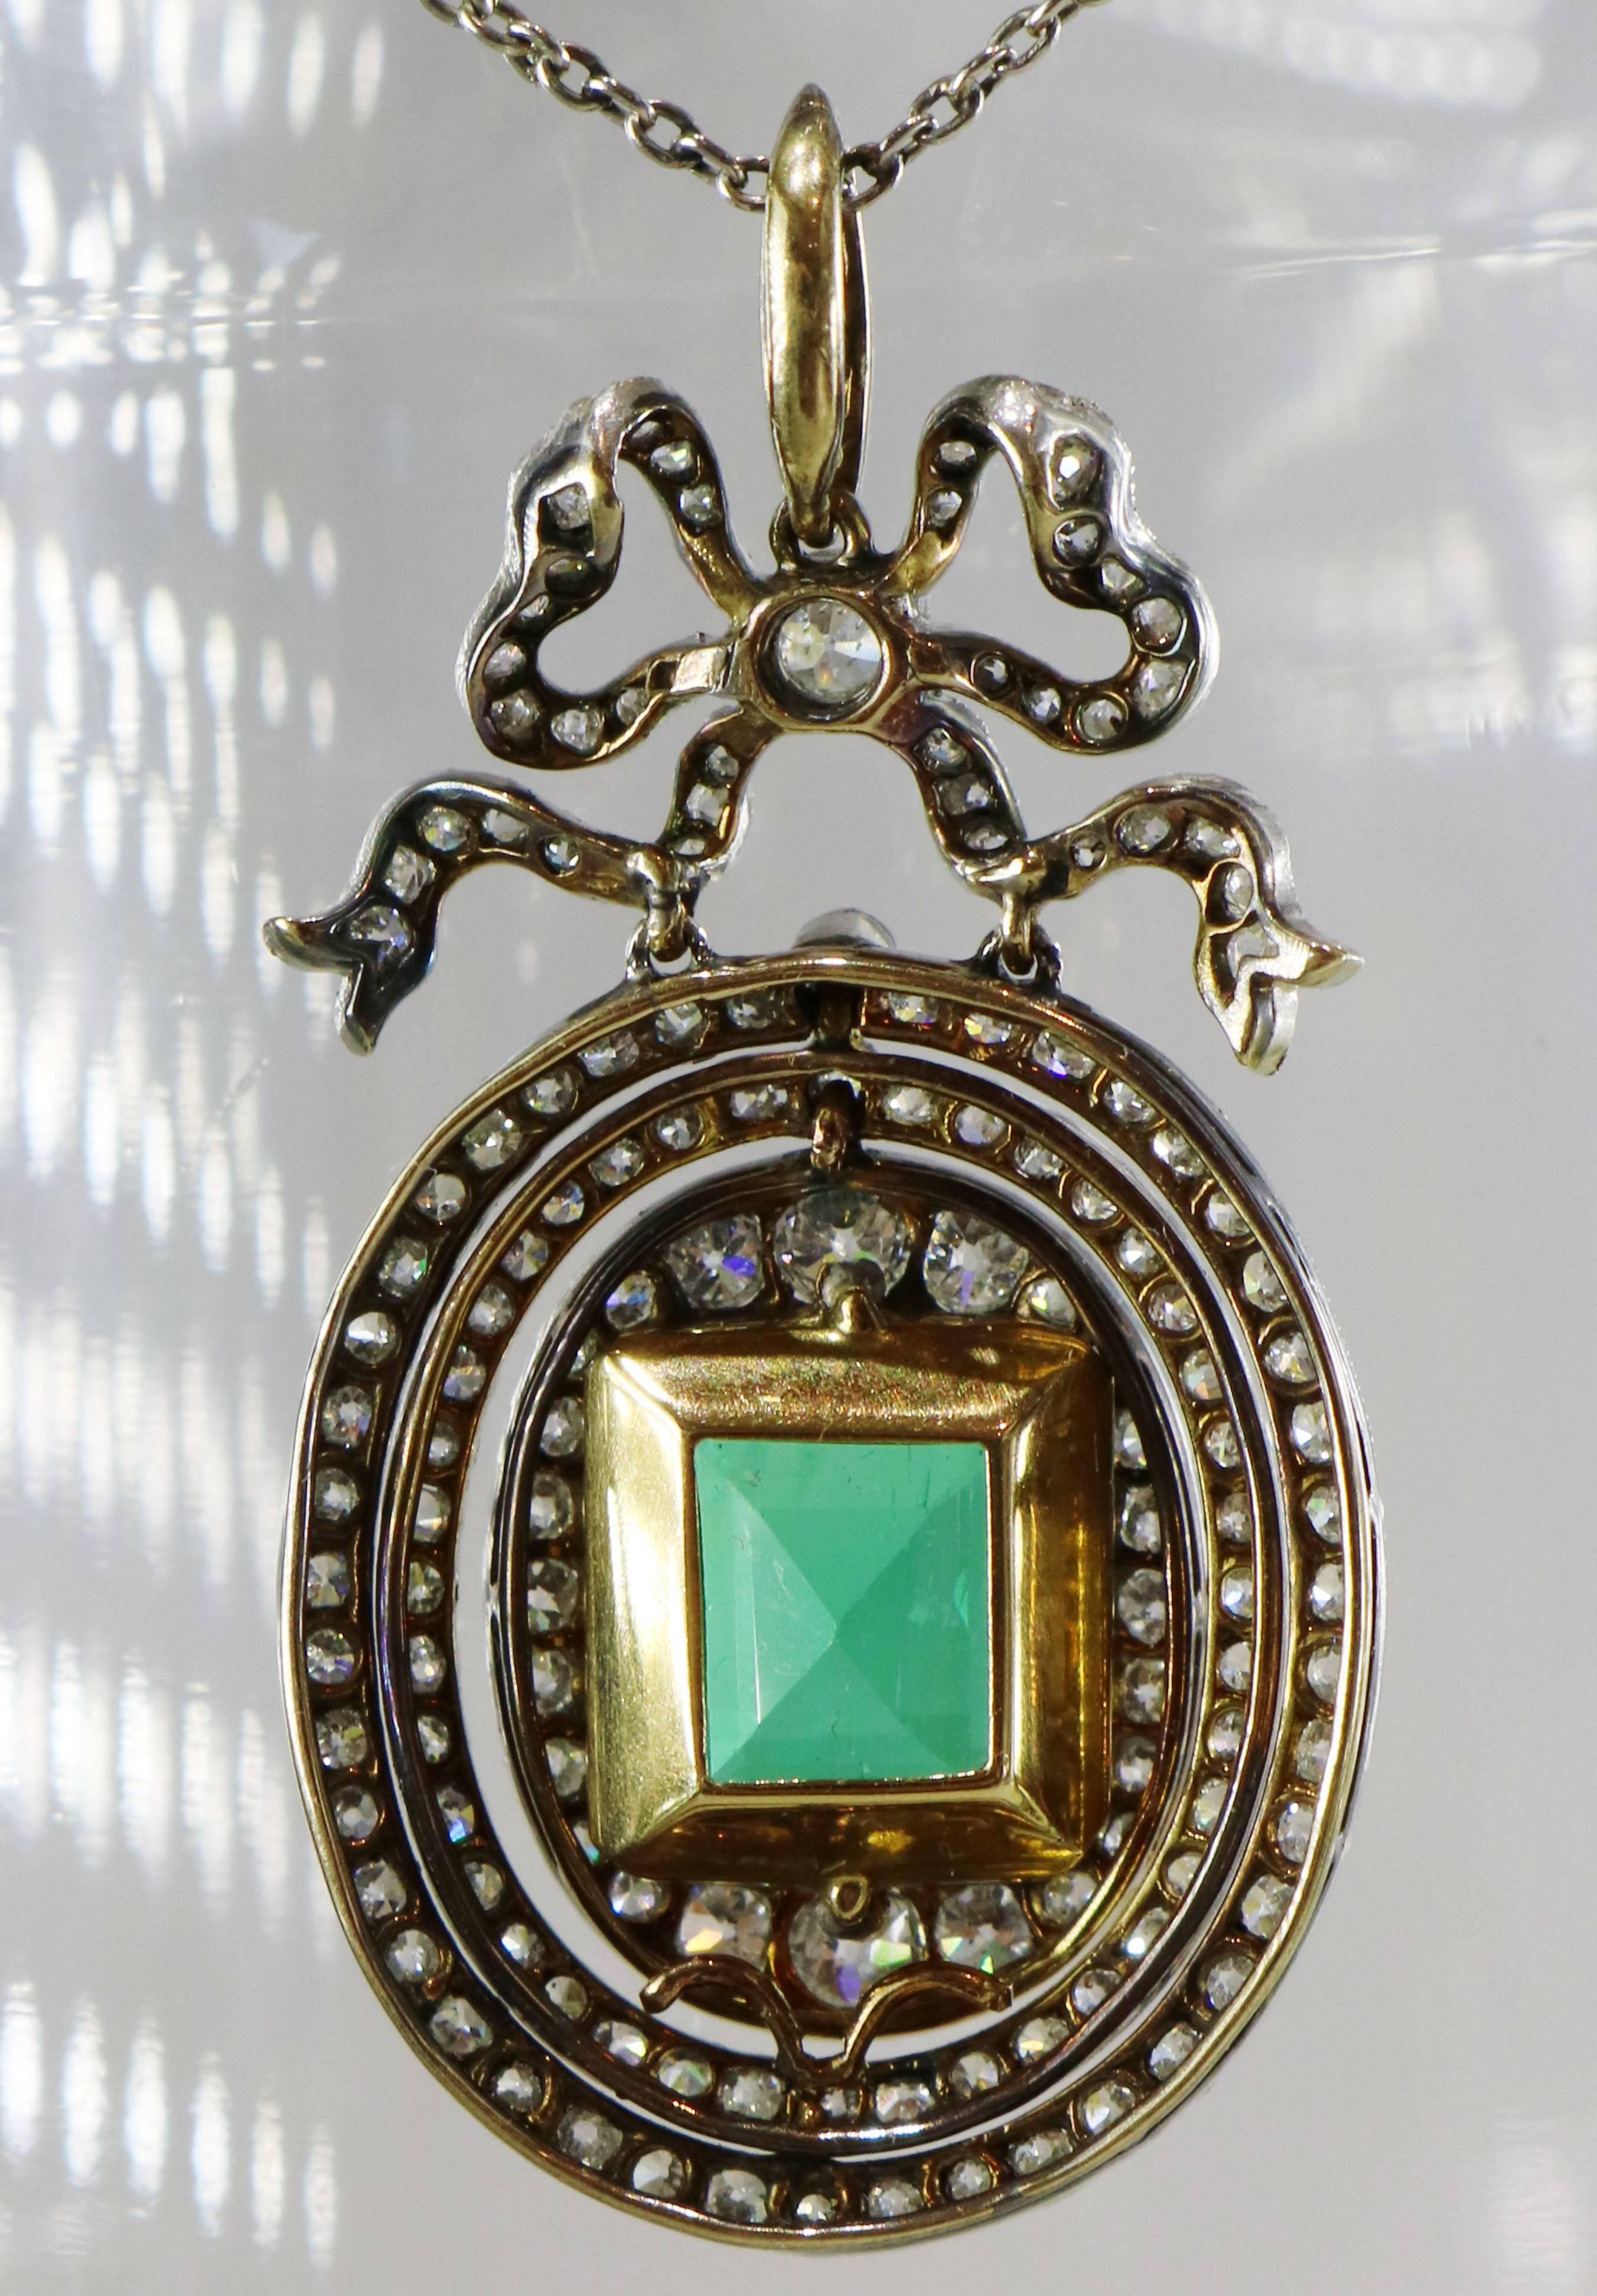 Platinum-topped flexible oval pendant set with over 2.50 carats of old European and single cut diamonds. In the center sits a square cushion cut Colombian emerald weighing over 4 carats. It has an AGL certificate stating that it is Colombian, and